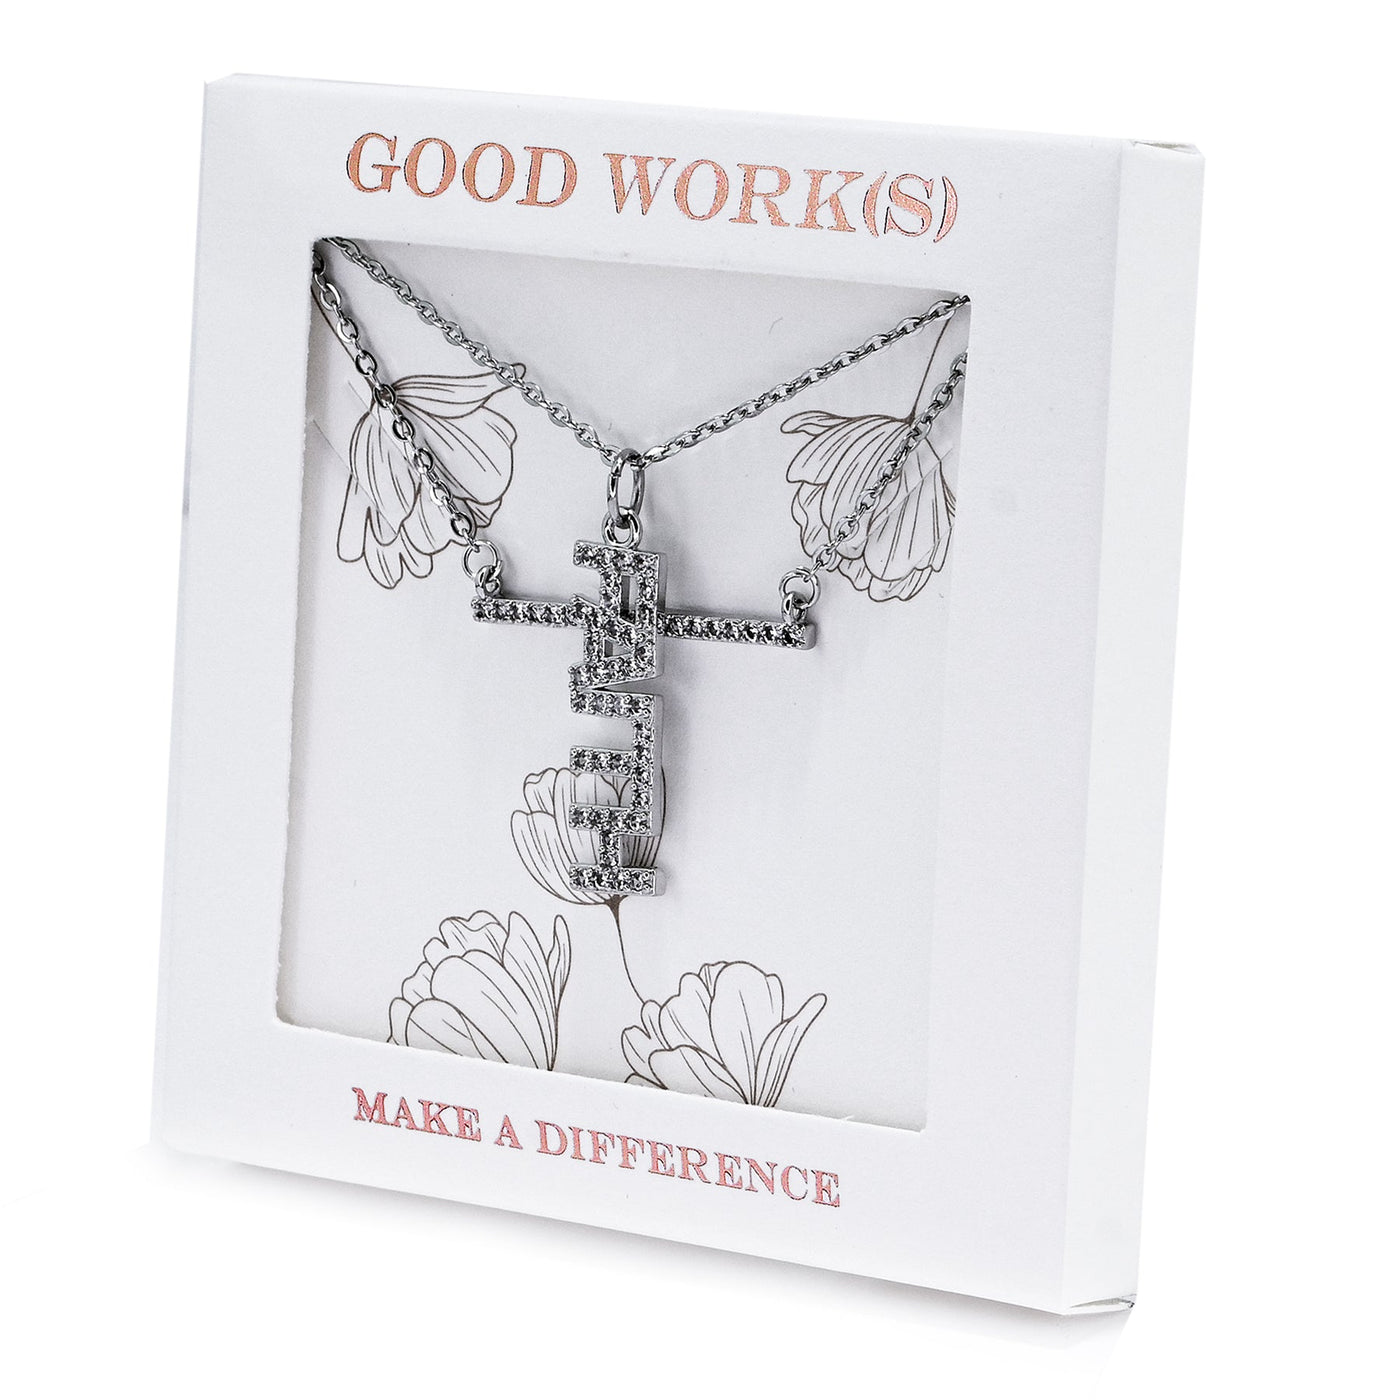 God's Grace Necklace-Good Work(s) Make A Difference® | Christian and Inspirational Jewelry Company in Vernon, California